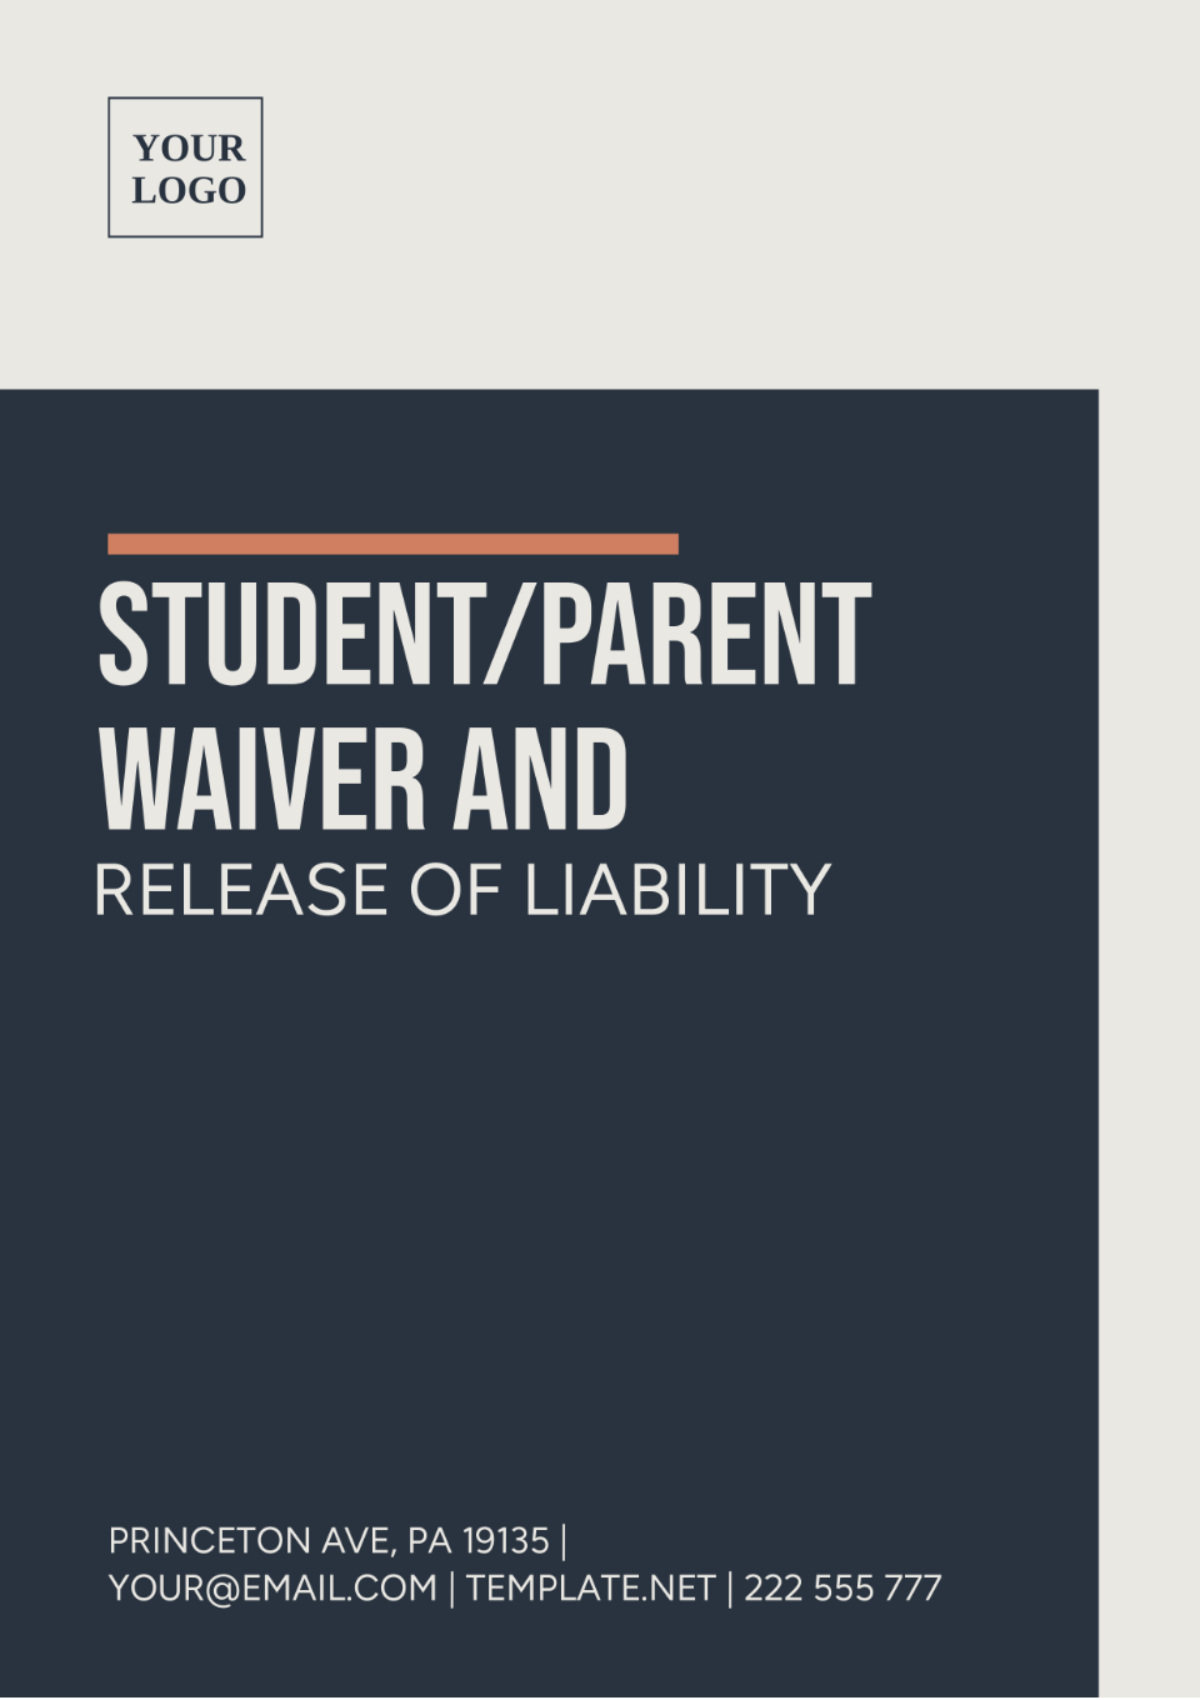 Student/Parent Waiver and Release of Liability Template